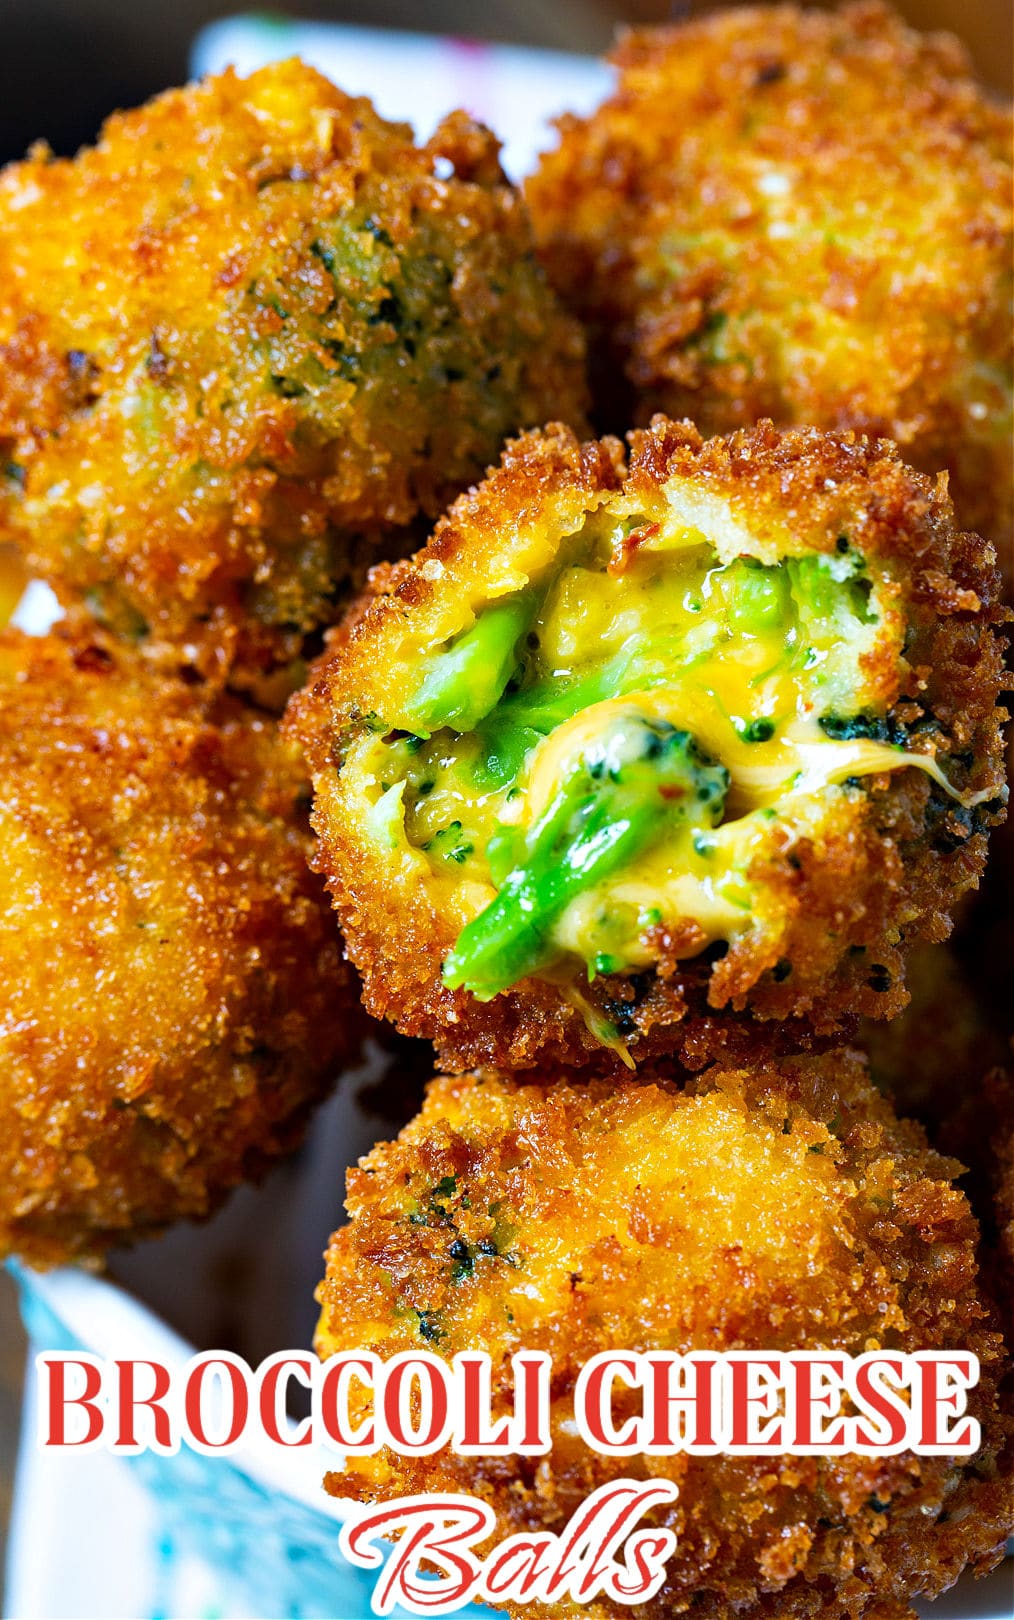 Fried Broccoli Cheese Balls. One has a bite bitten out showing inside.